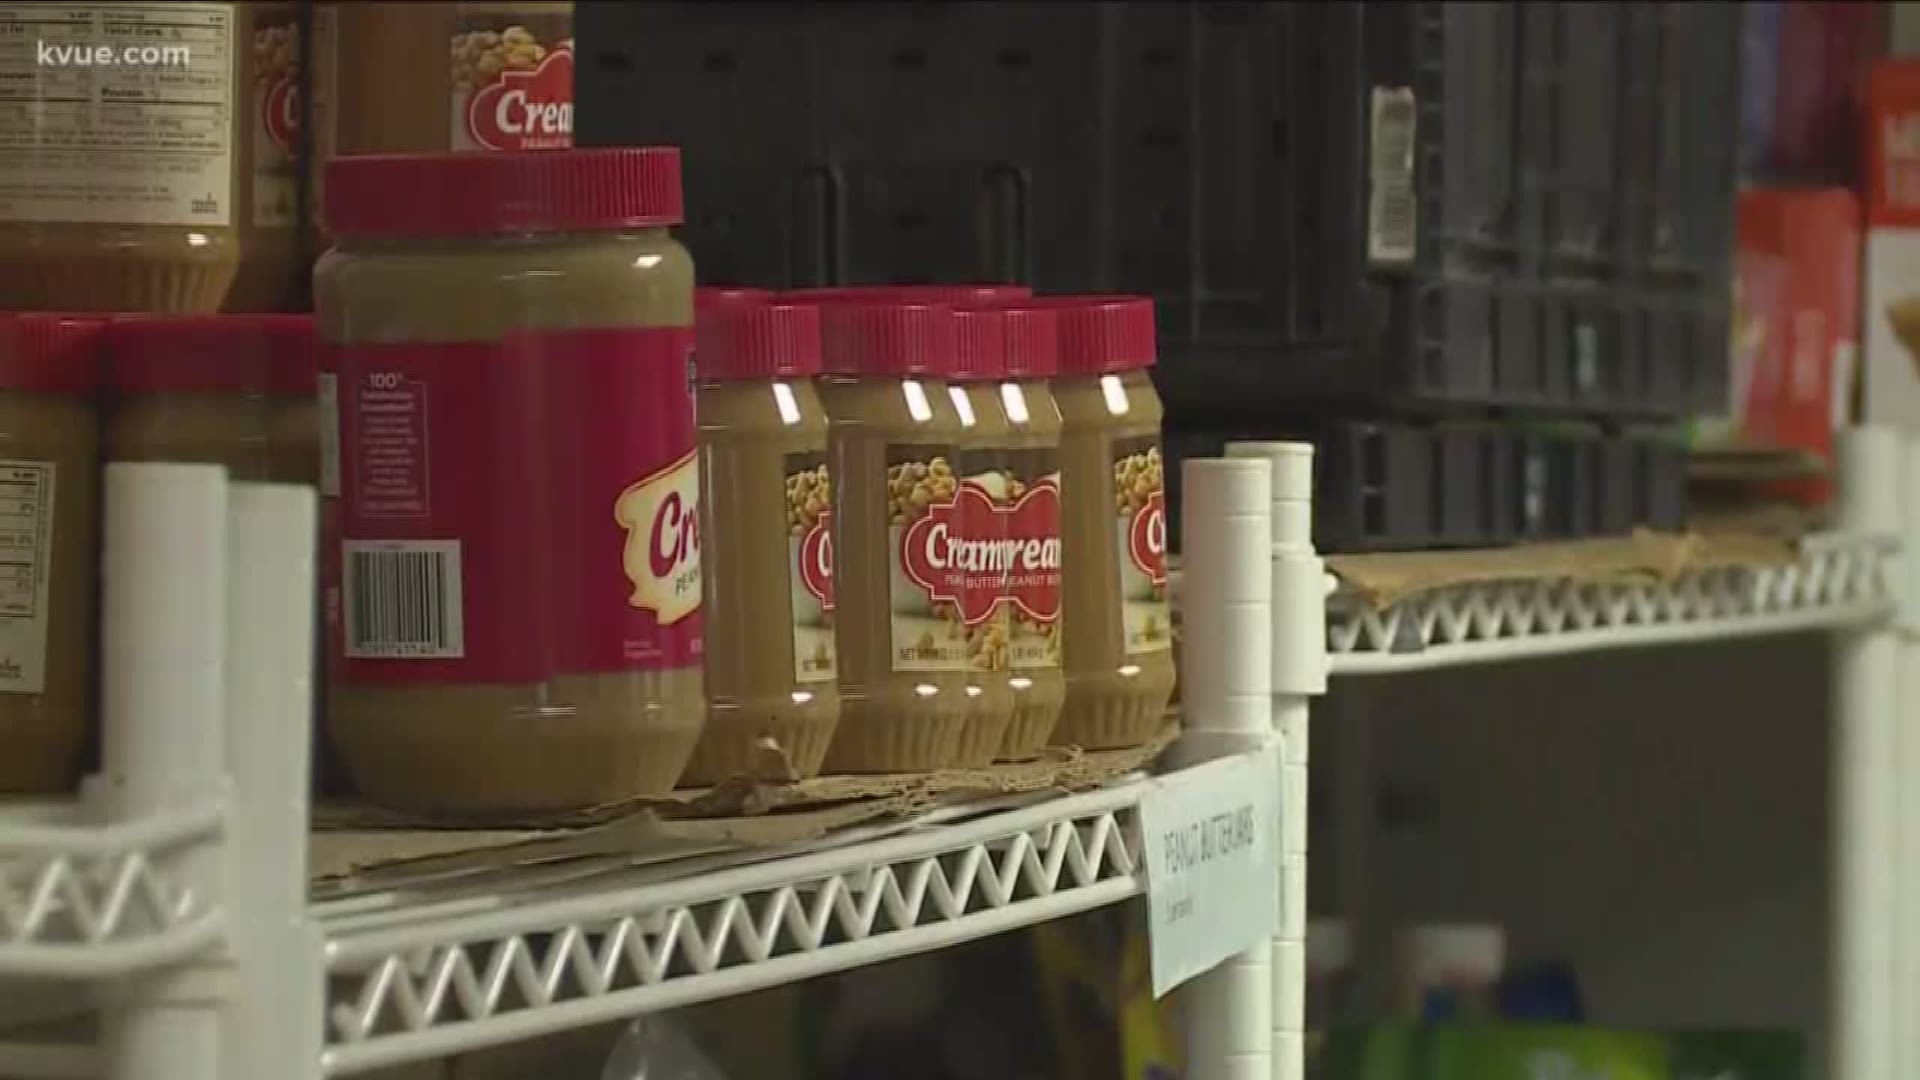 Stretching into the 25th day, federal workers still have to feed their families and pay bills. KVUE spoke with the Central Texas Food Bank about its efforts to help.